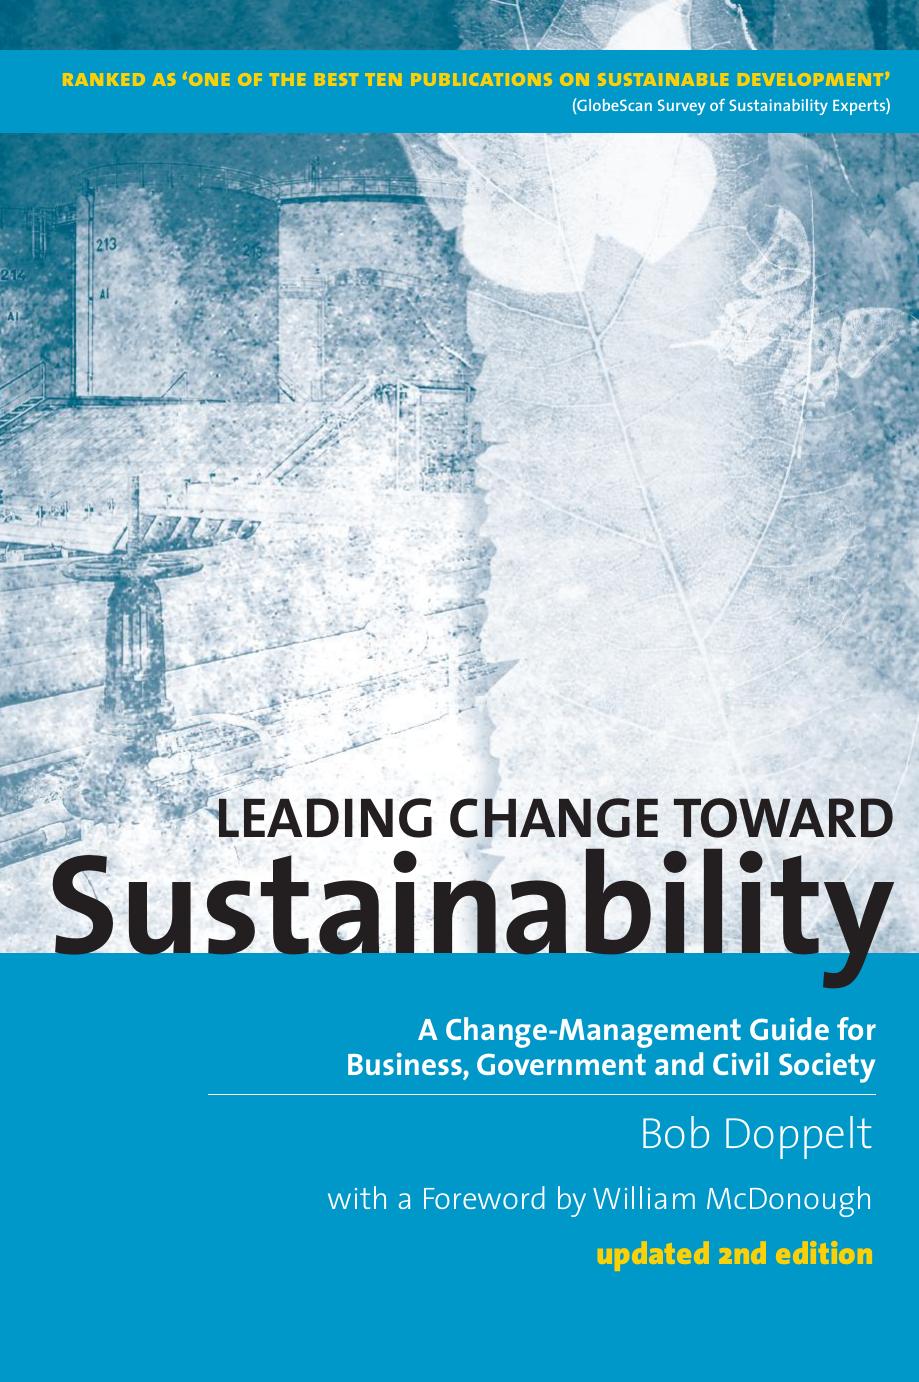 Leading Change Toward Sustainability : A Change-Management Guide for Business, Government and Civil Society by Bob Doppelt